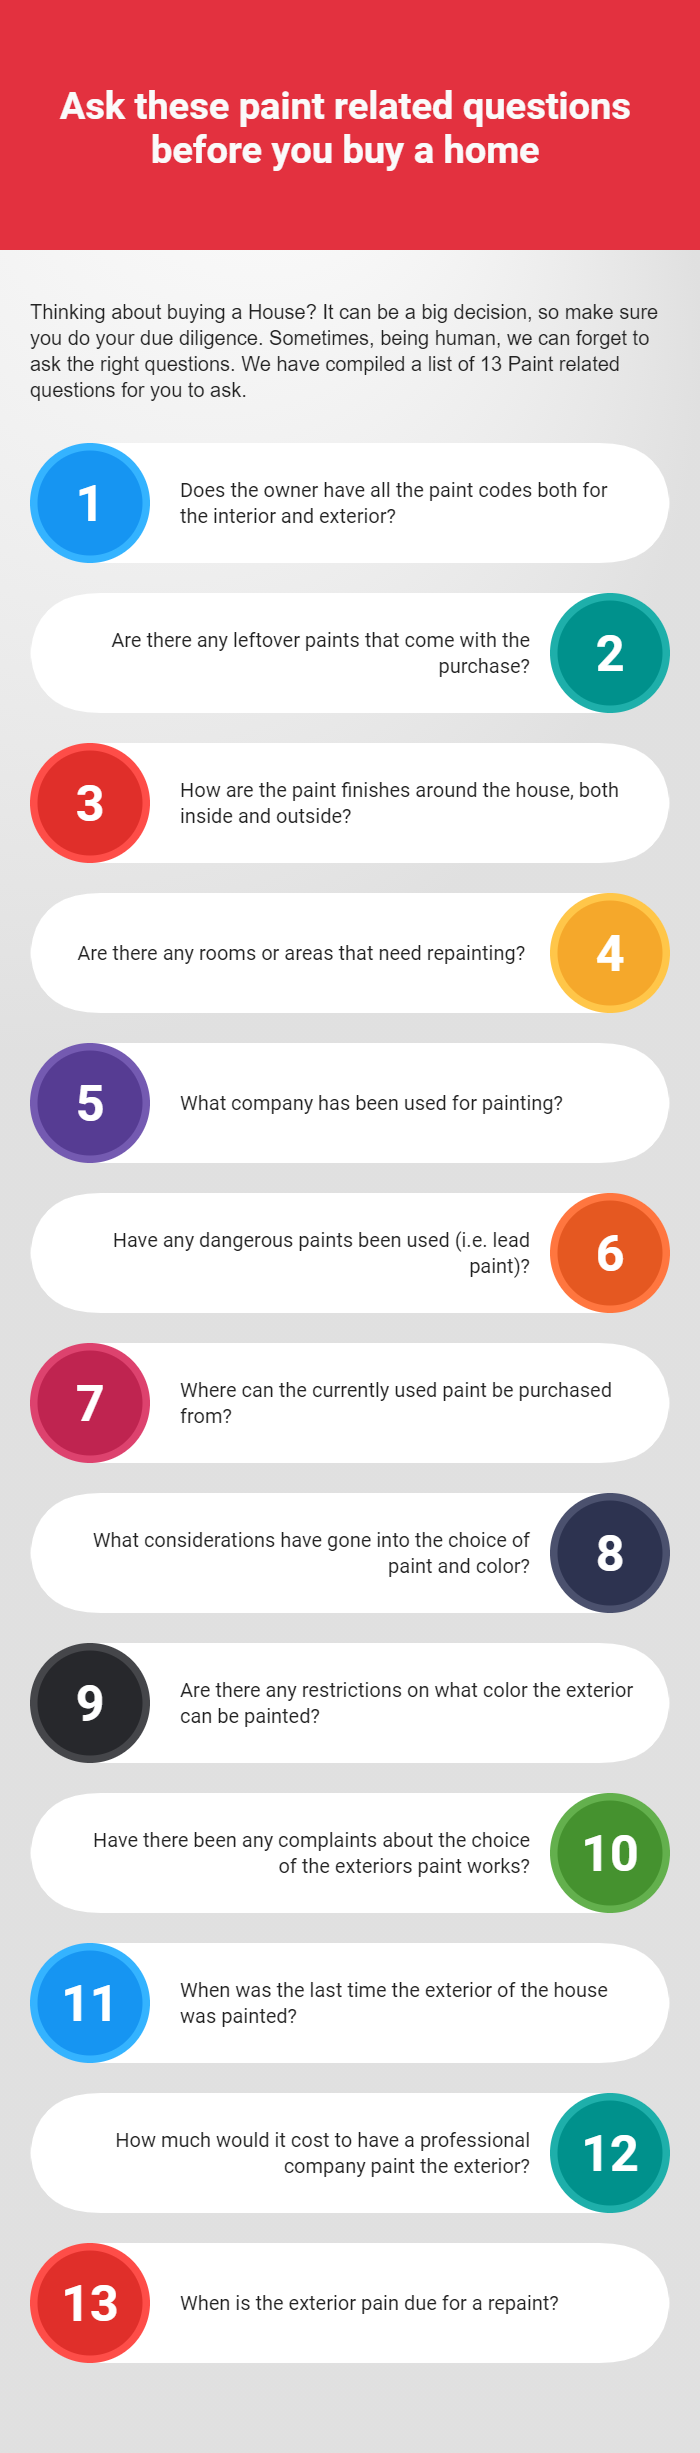 Ask these paint related questions before you buy a home